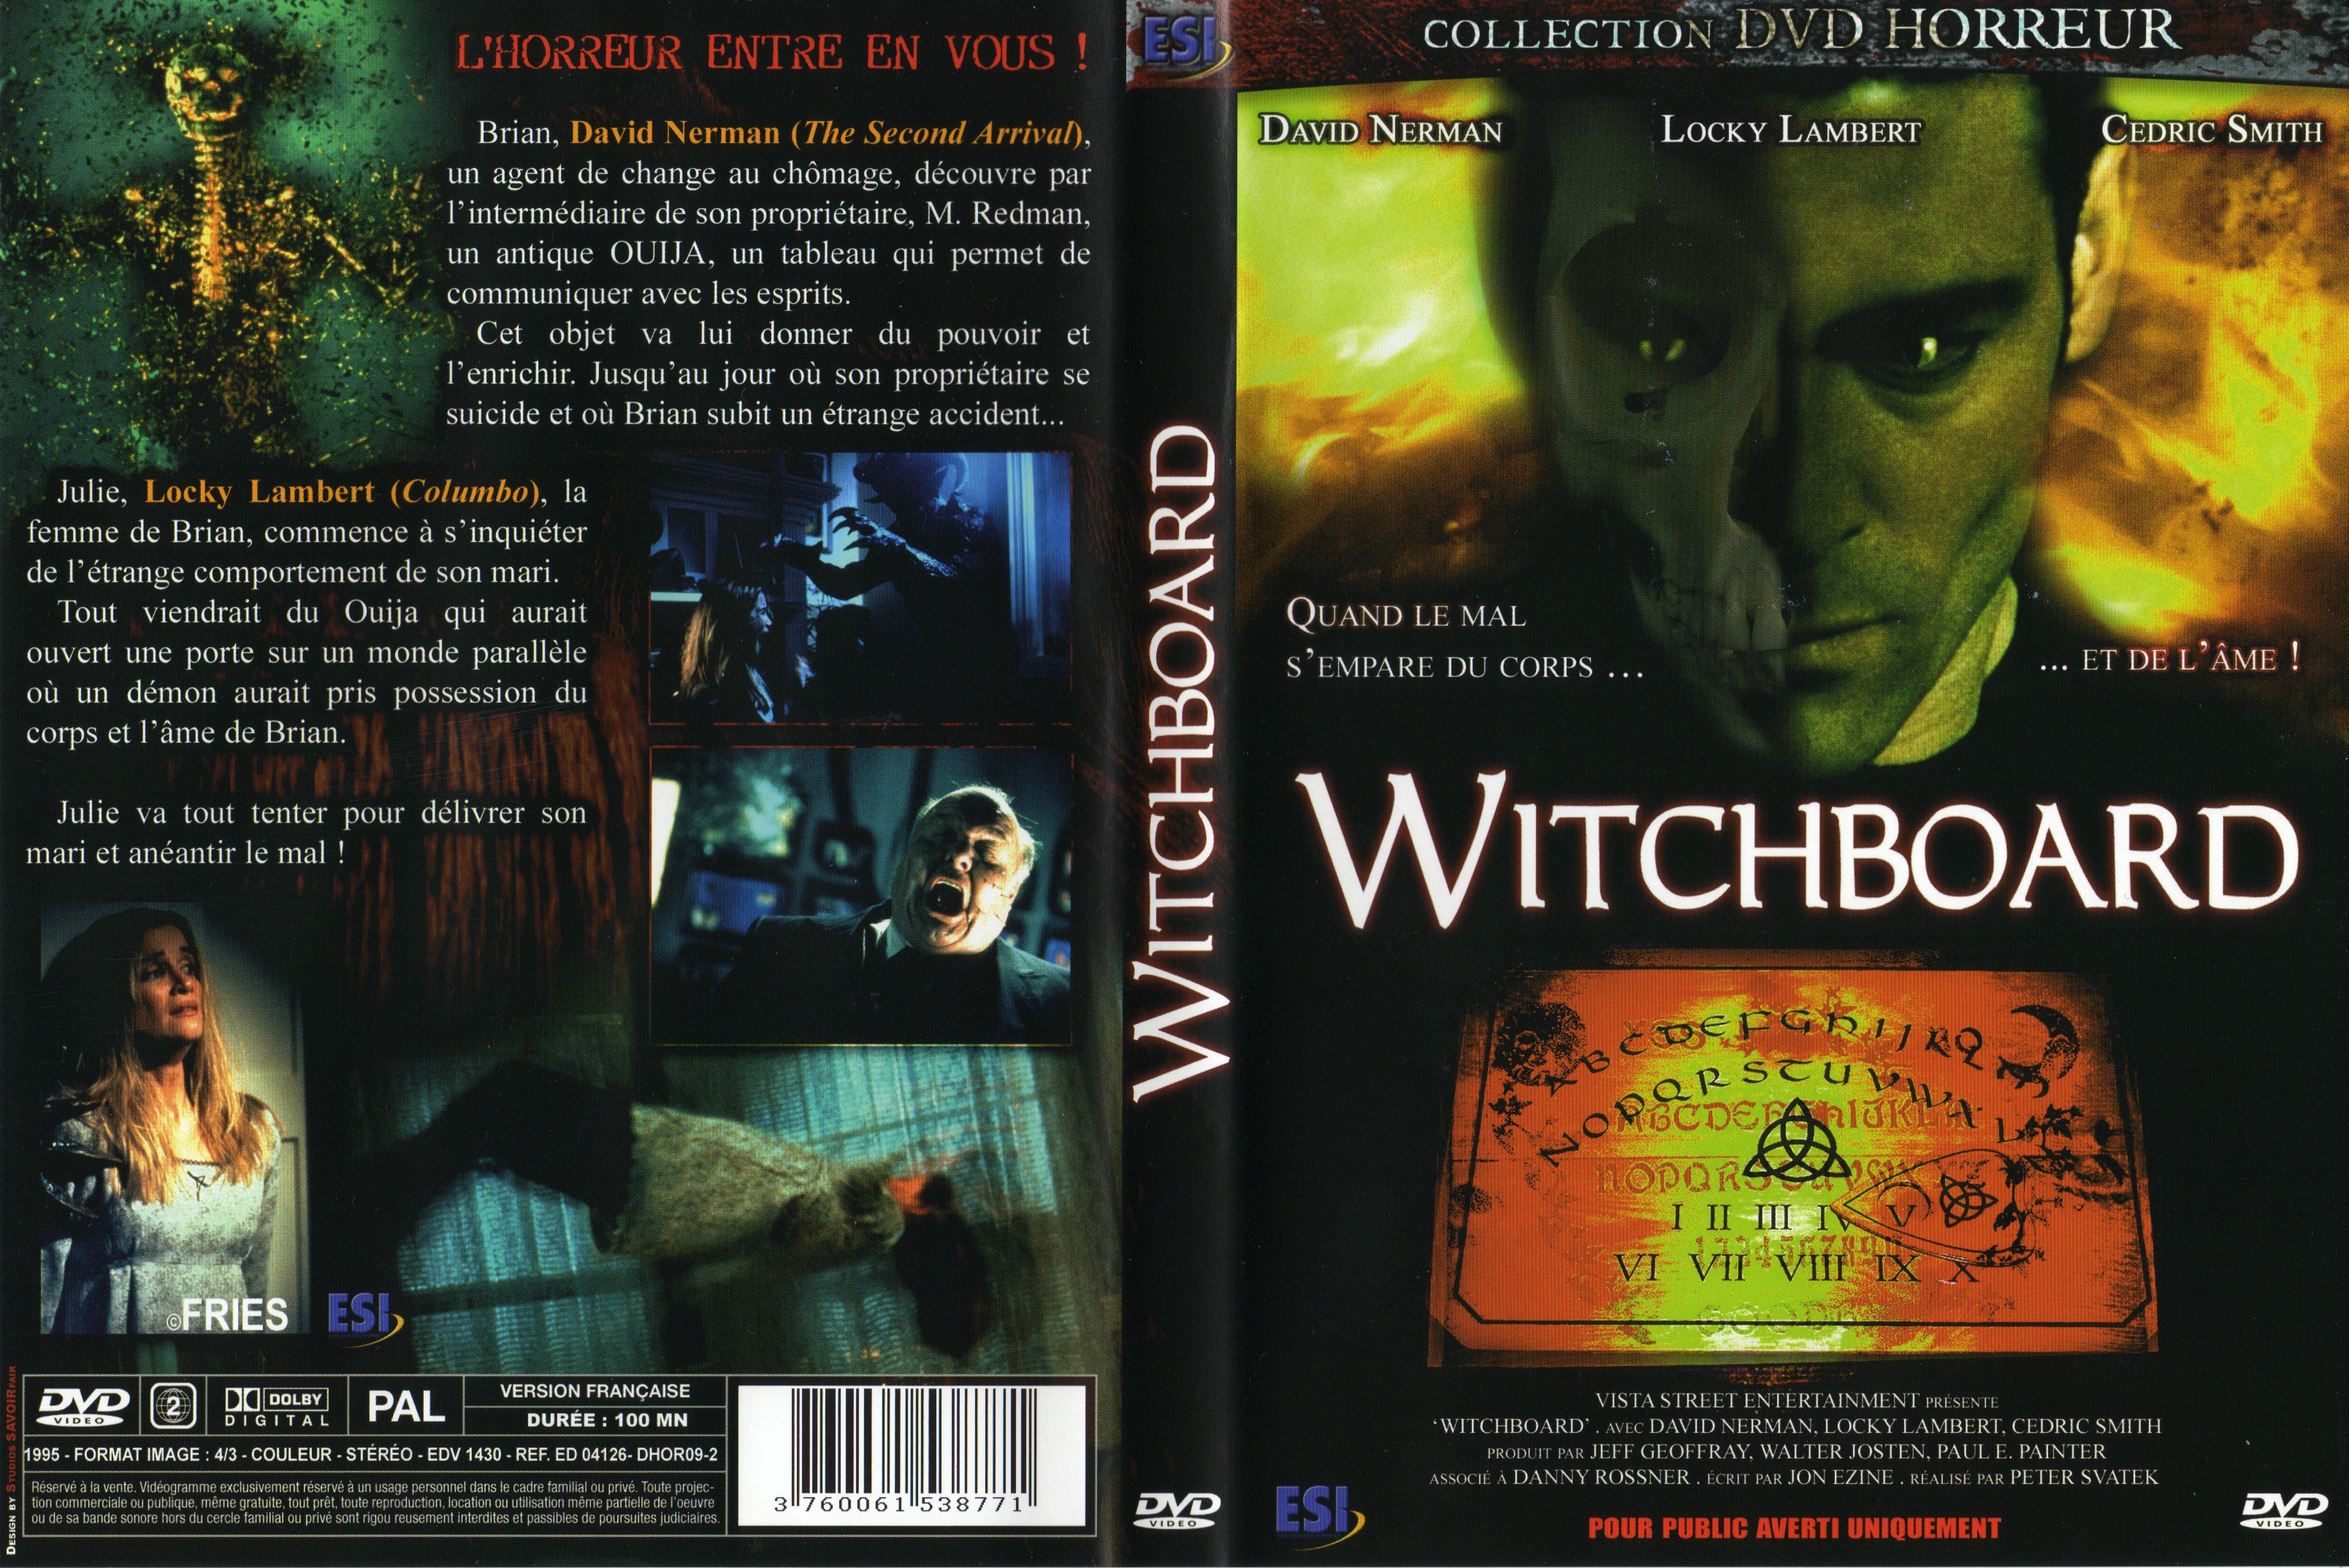 Jaquette DVD Witchboard